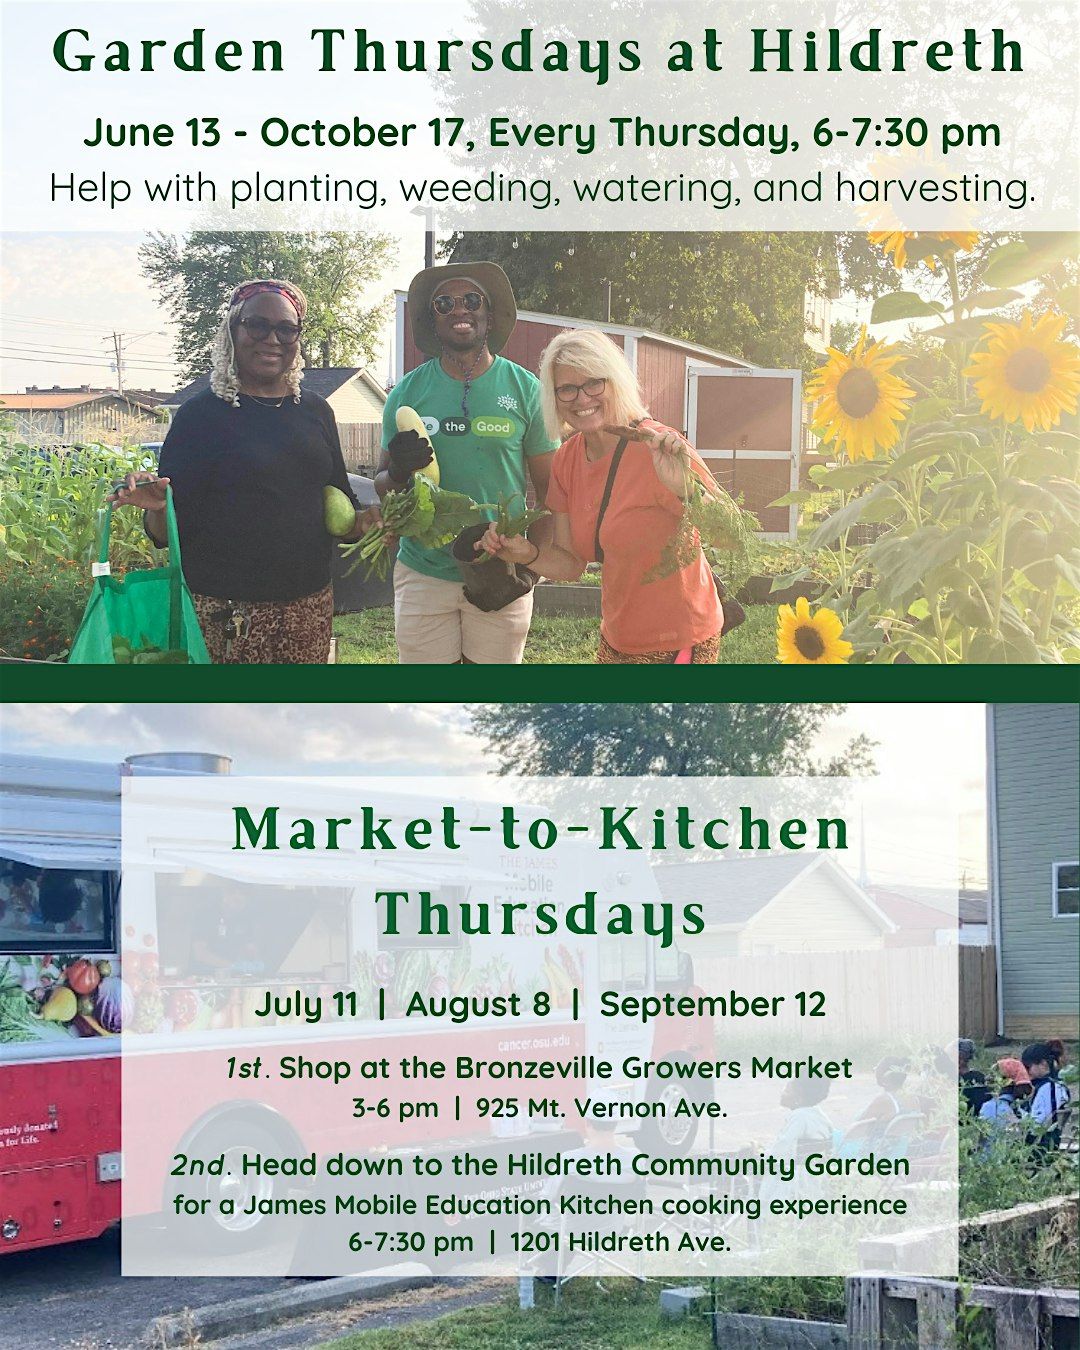 July 11th Market-to-Kitchen Thursday by the Growing and Growth Collective